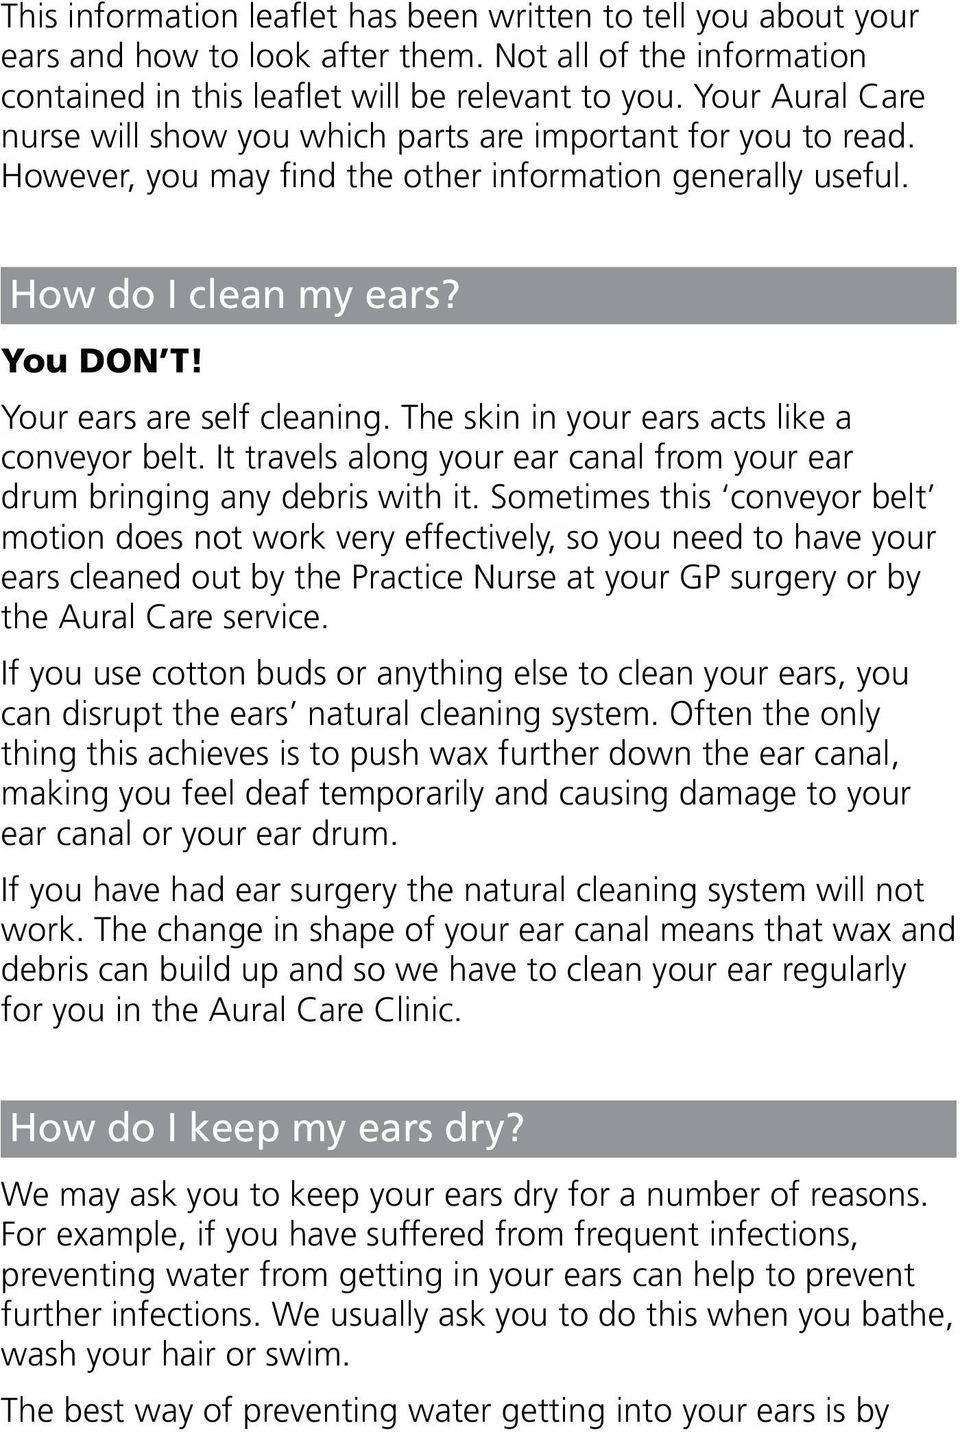 Your ears are self cleaning. The skin in your ears acts like a conveyor belt. It travels along your ear canal from your ear drum bringing any debris with it.